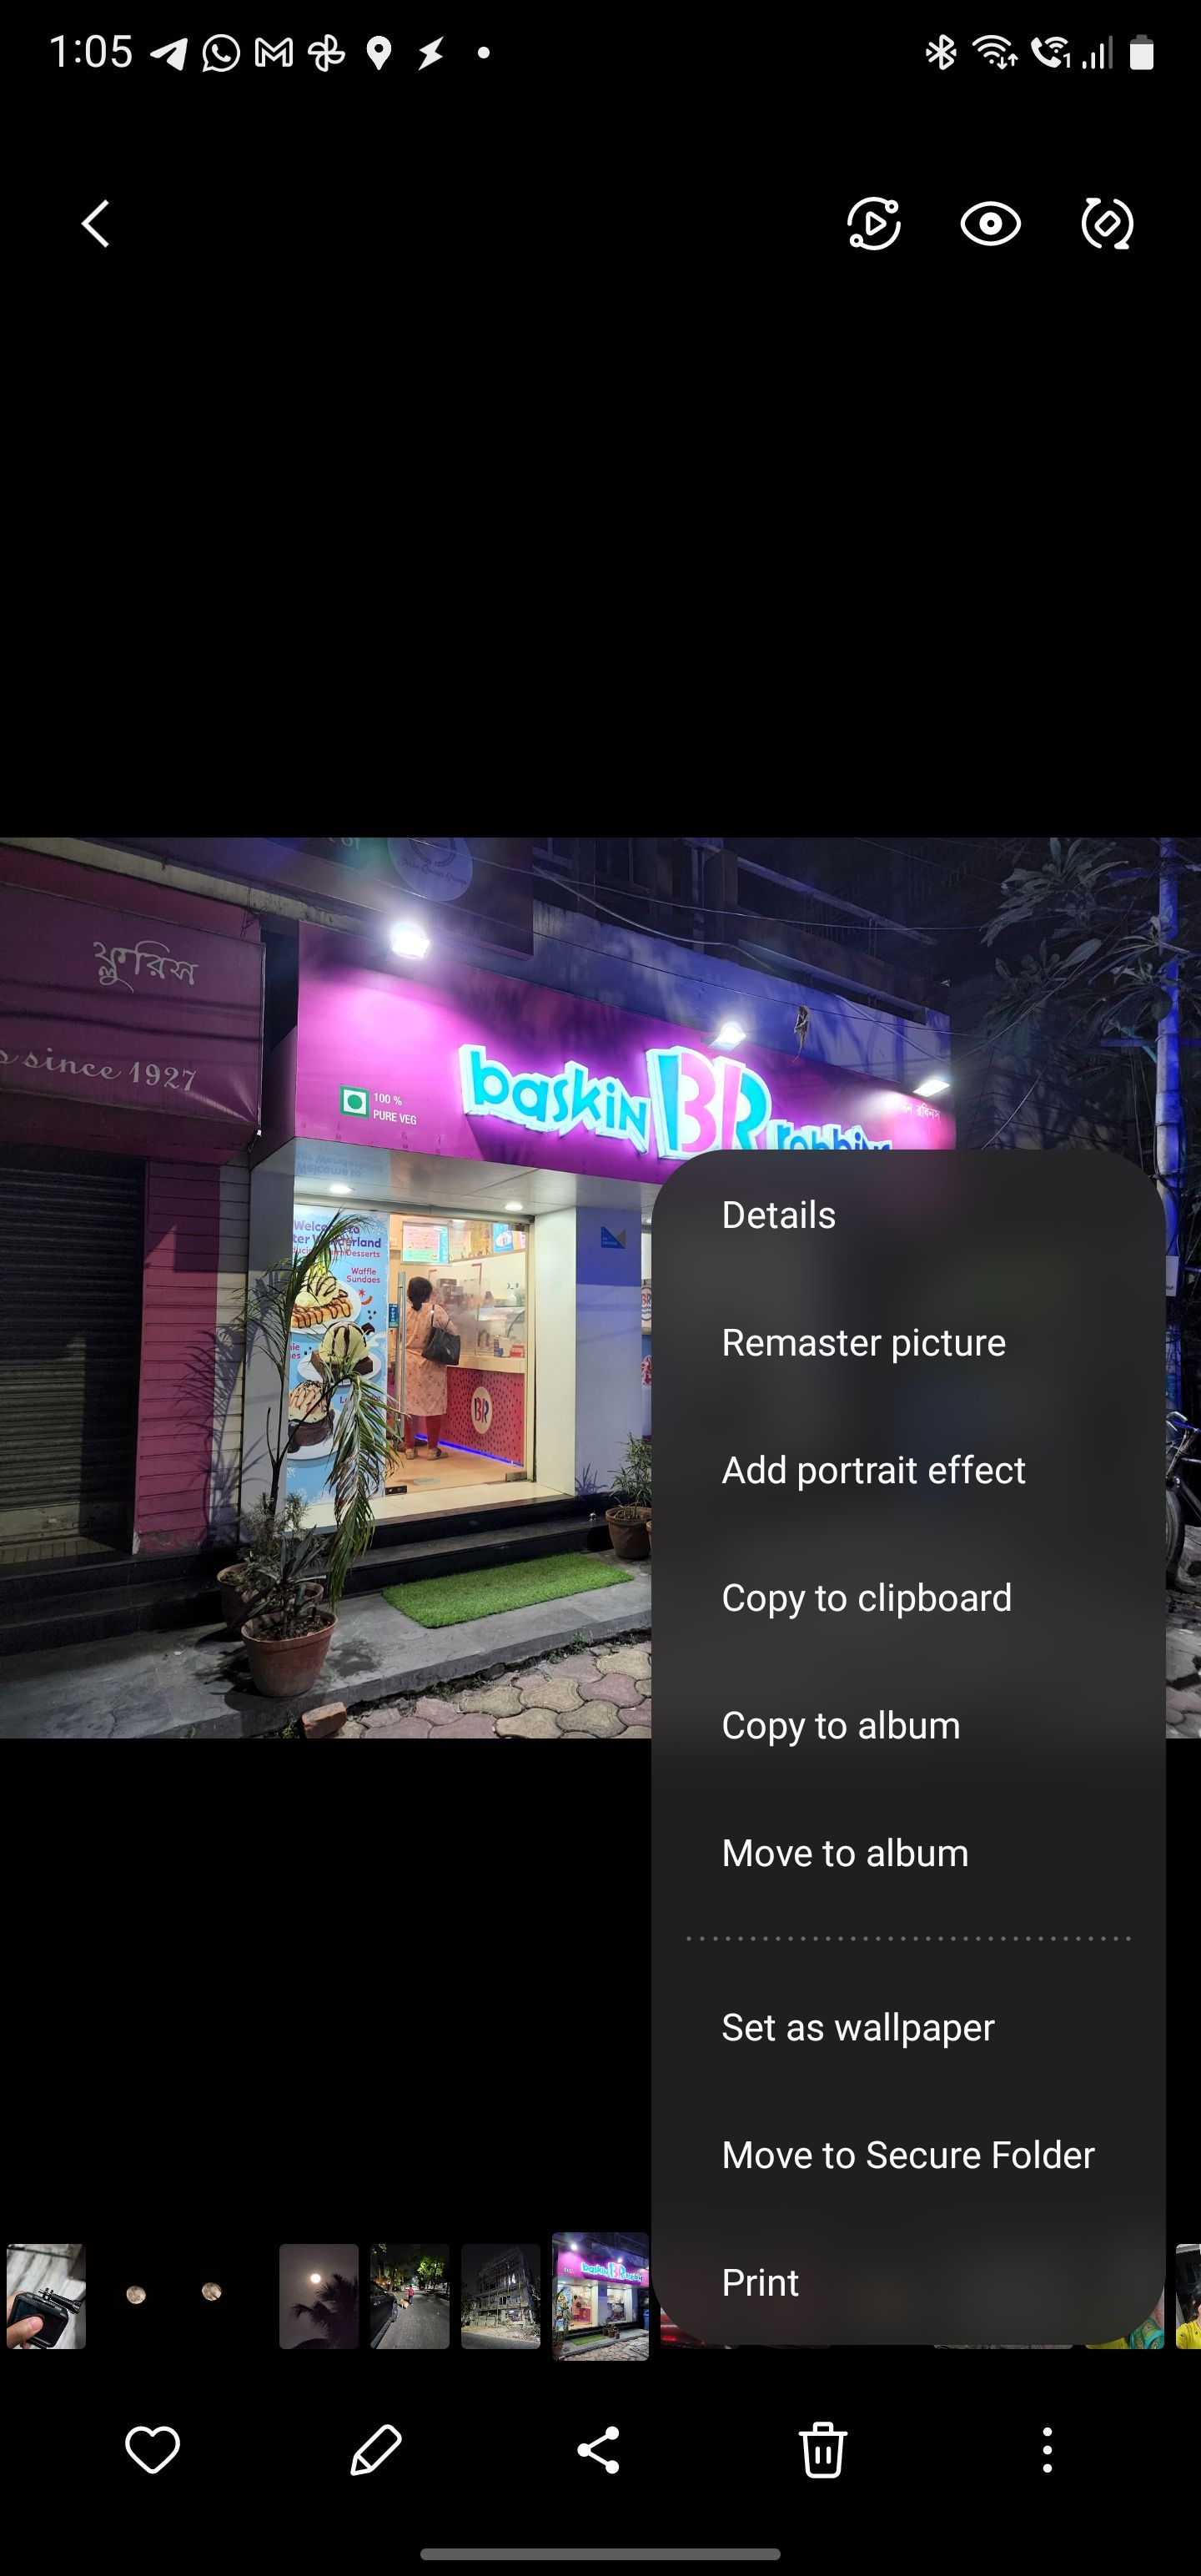 The options for a photo in Samsung Gallery